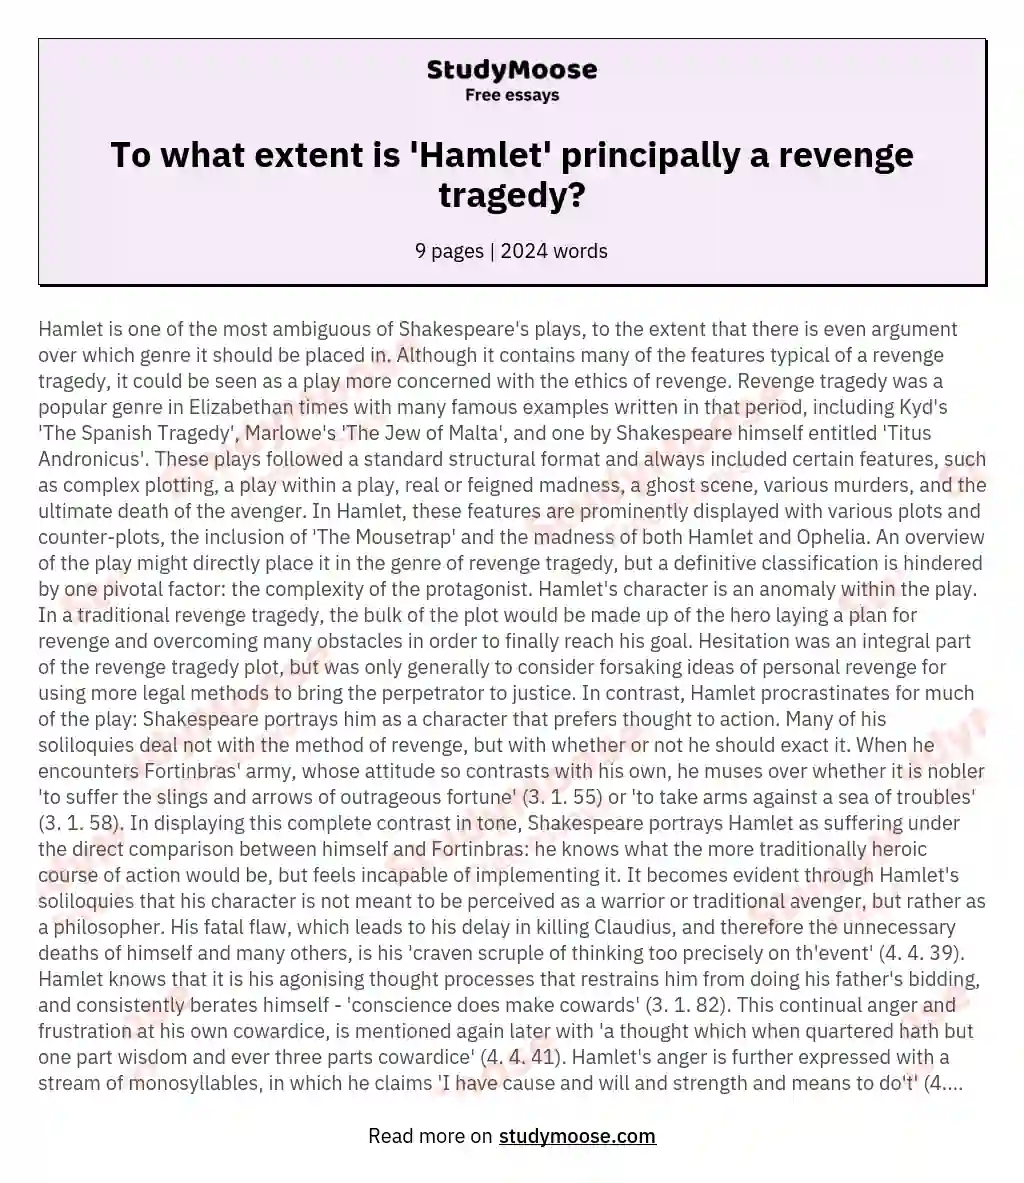 To what extent is 'Hamlet' principally a revenge tragedy? essay